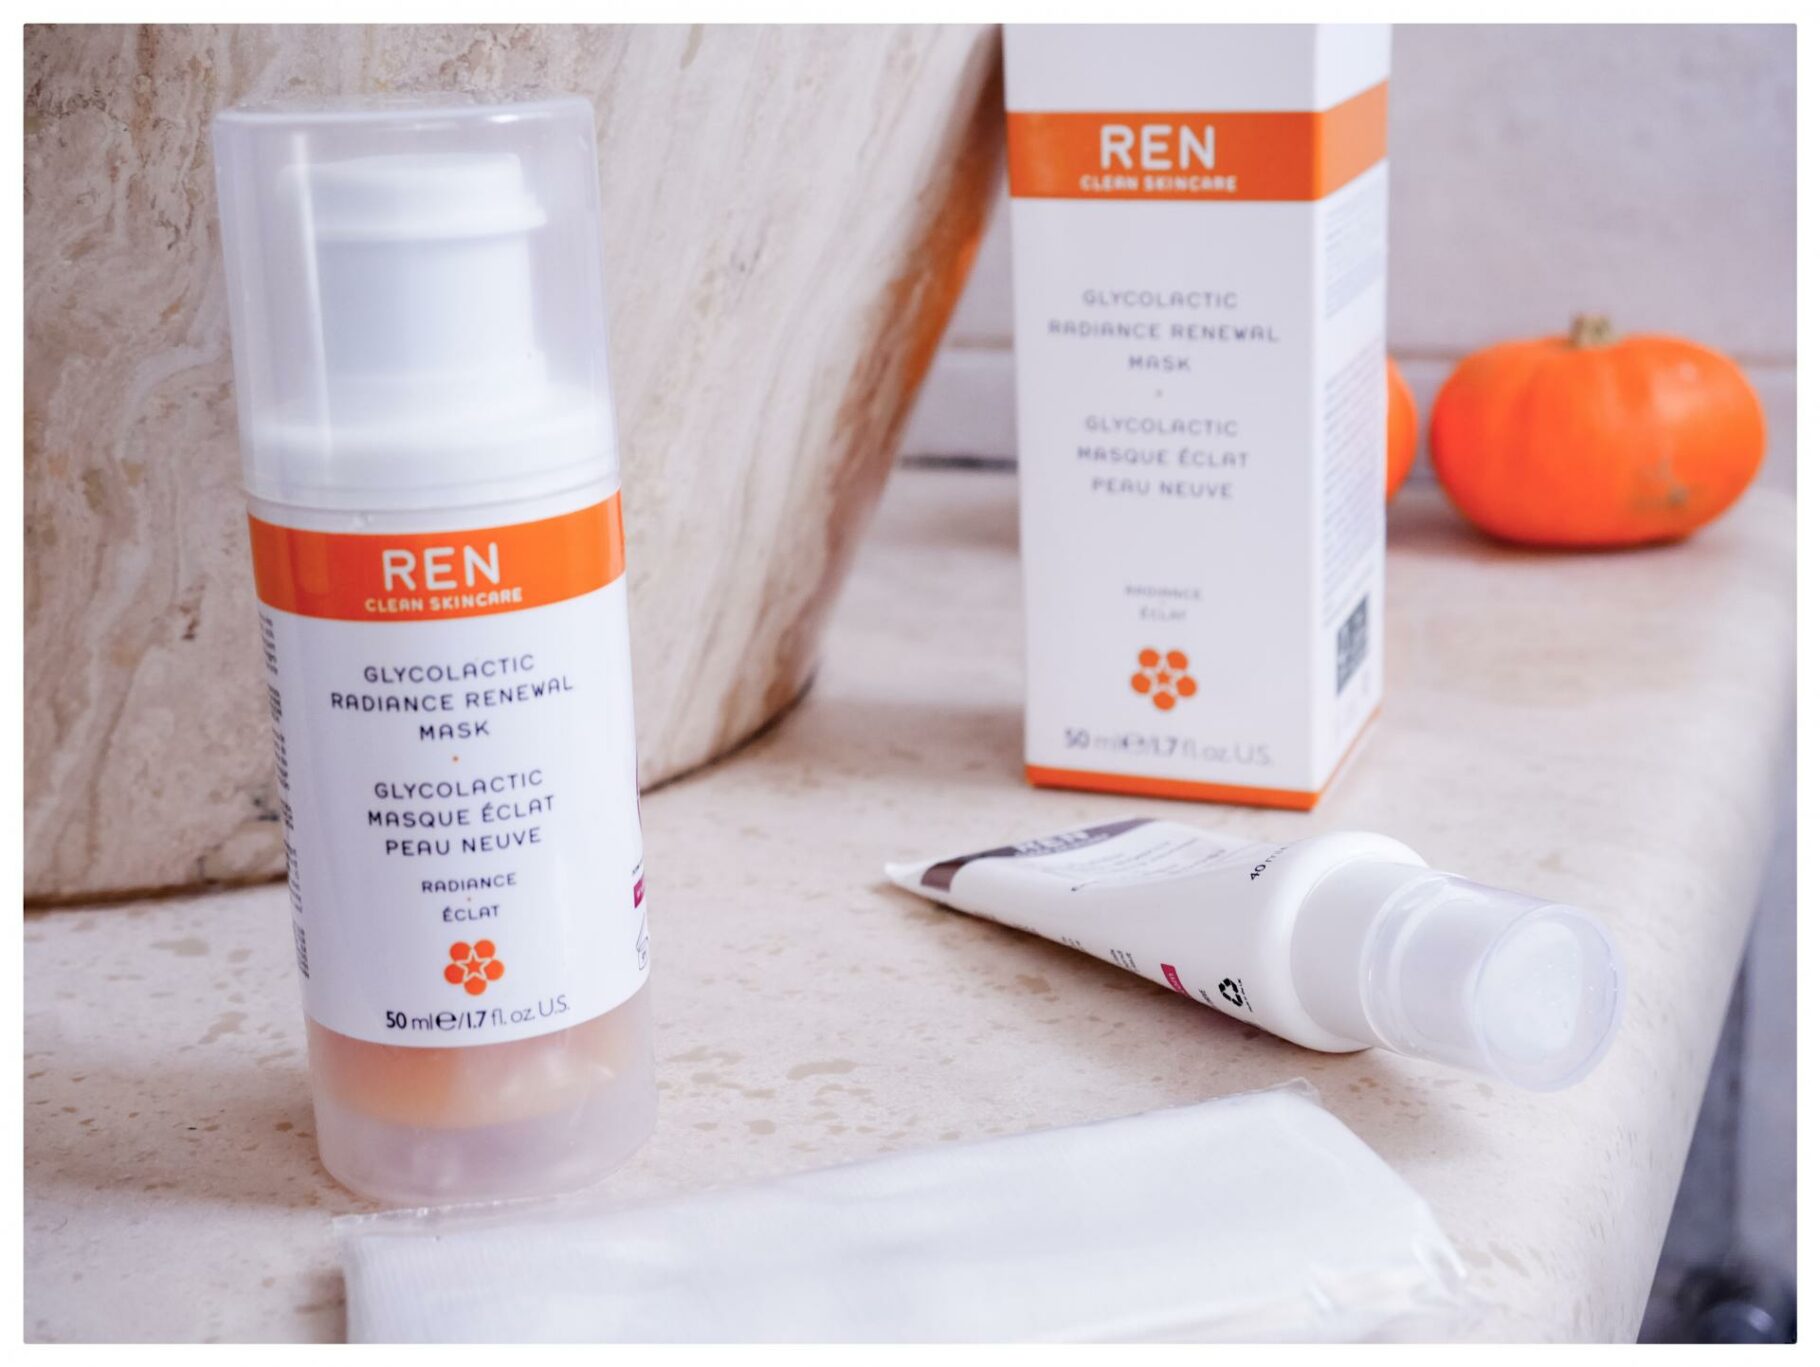 Ren Skincare Glyco Lactic Radiance Renewal Mask Review